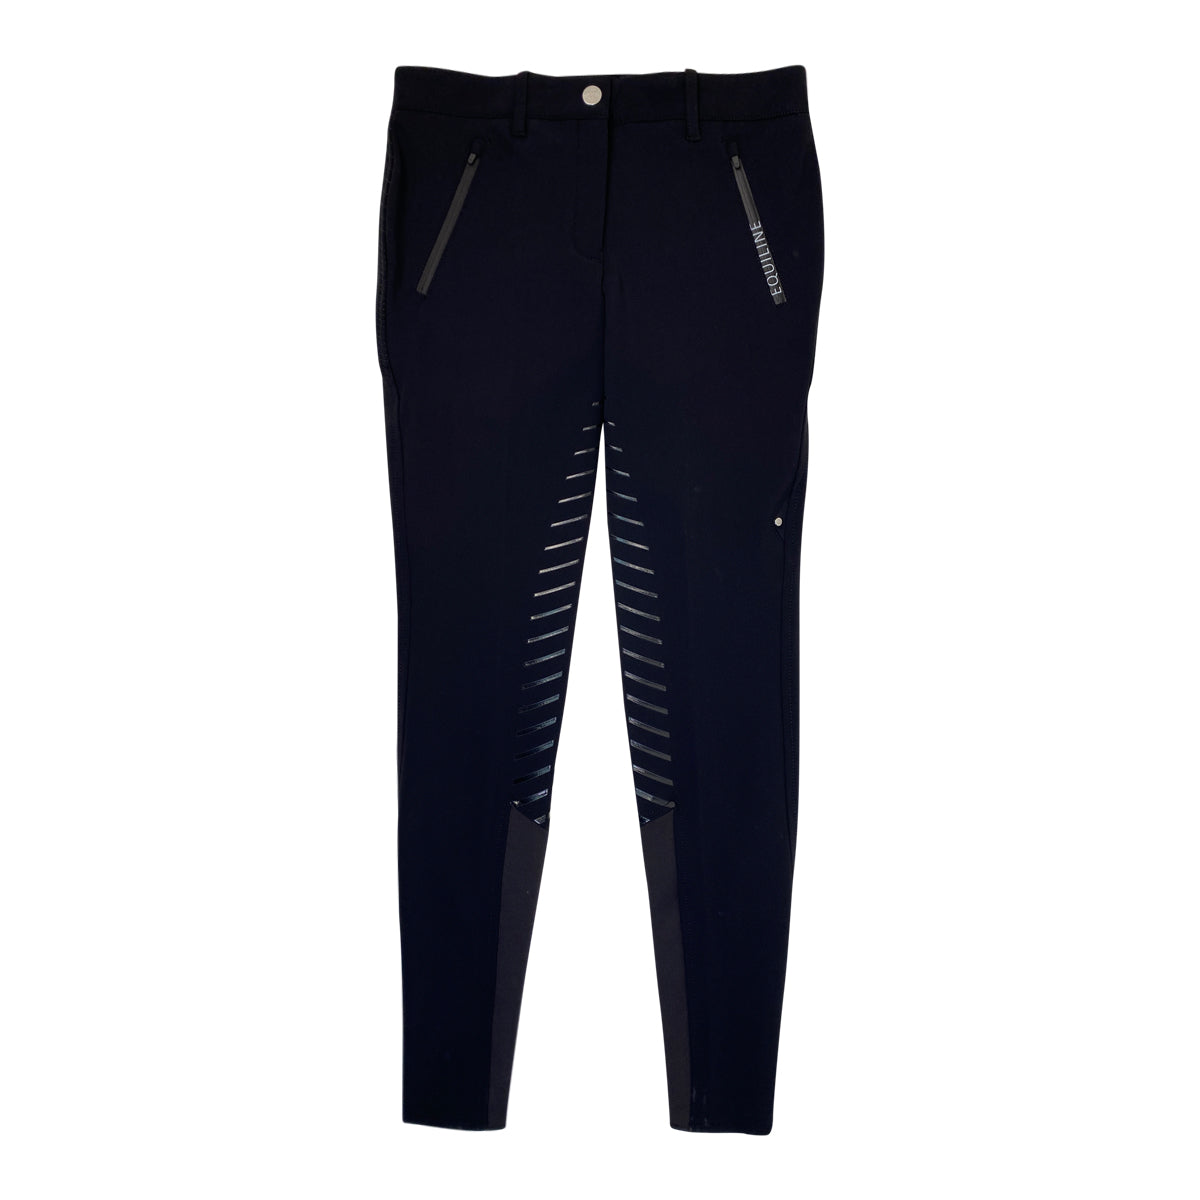 Equiline 'ChoiceF' High Waisted Full Seat Breeches in Black